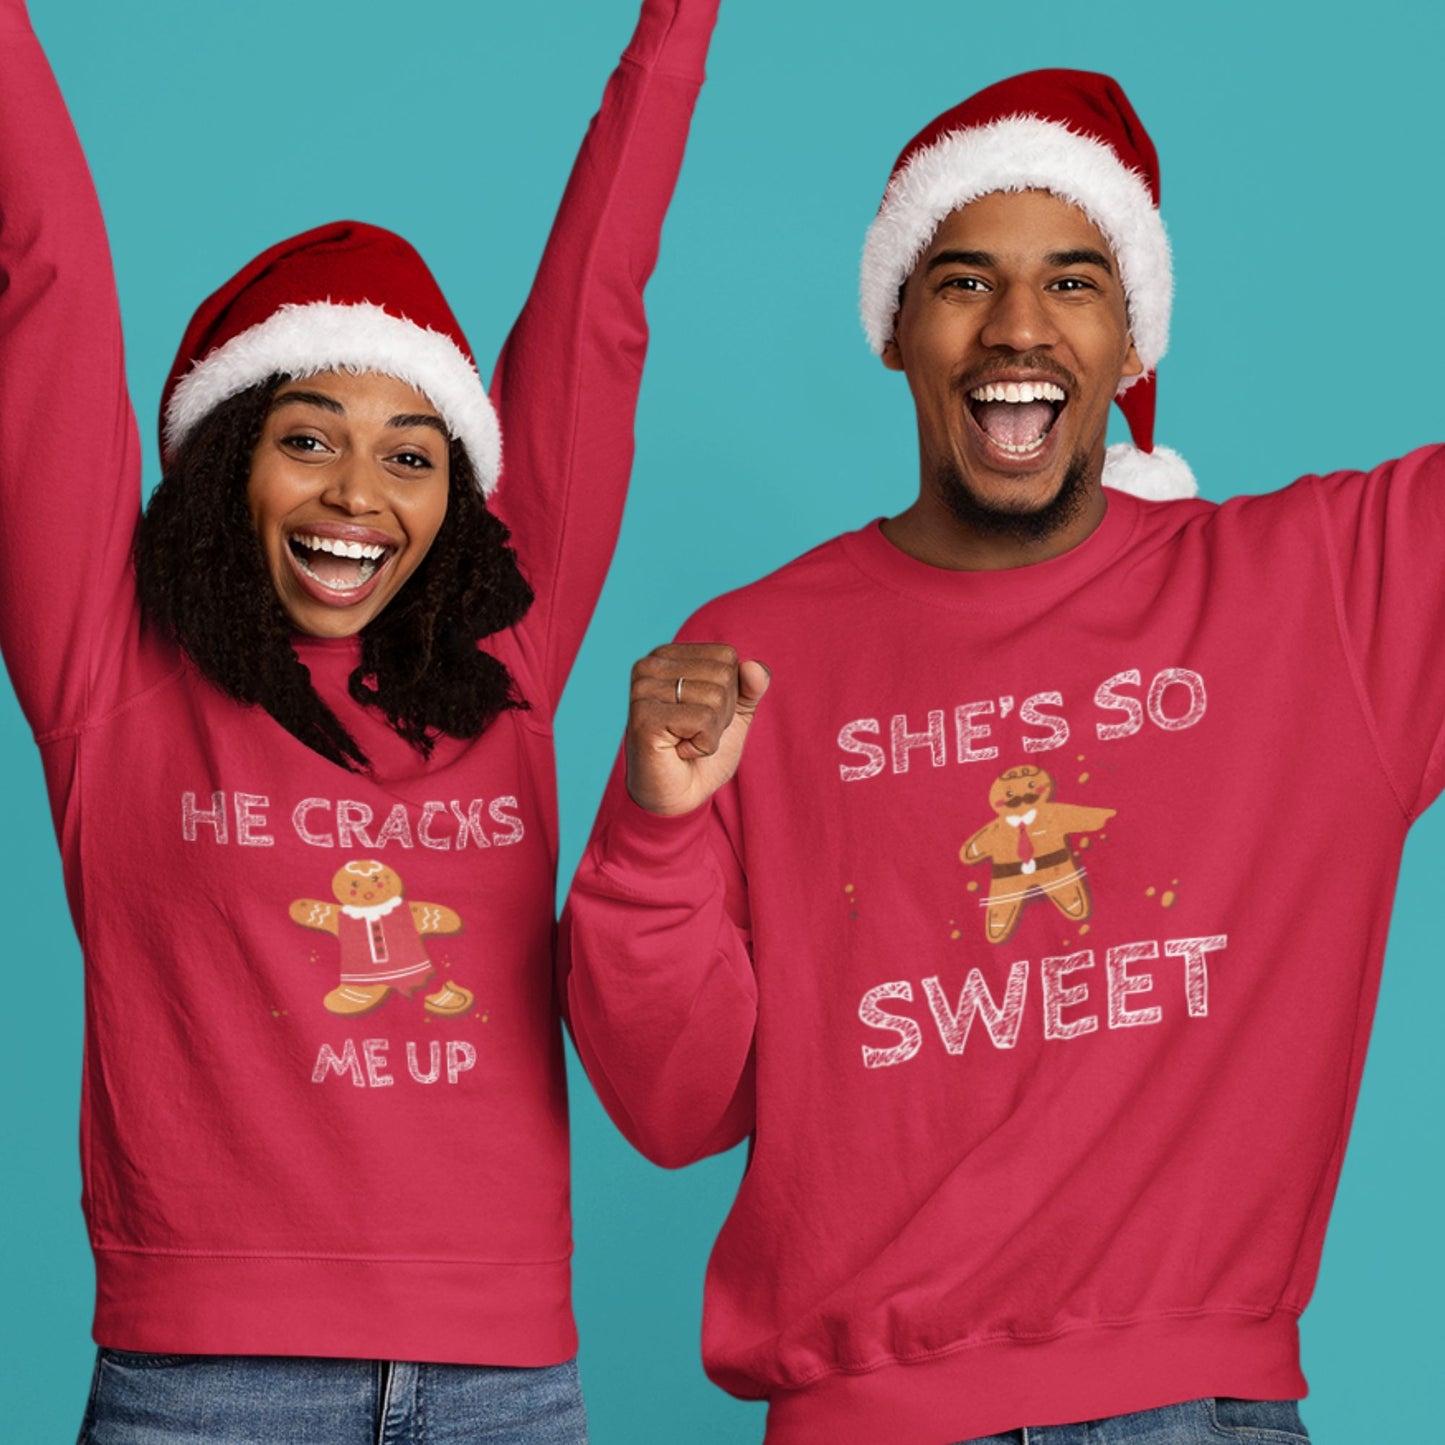 She's So Sweet/He Cracks Me Up - Hilarious Christmas Matching Outfits For Couples